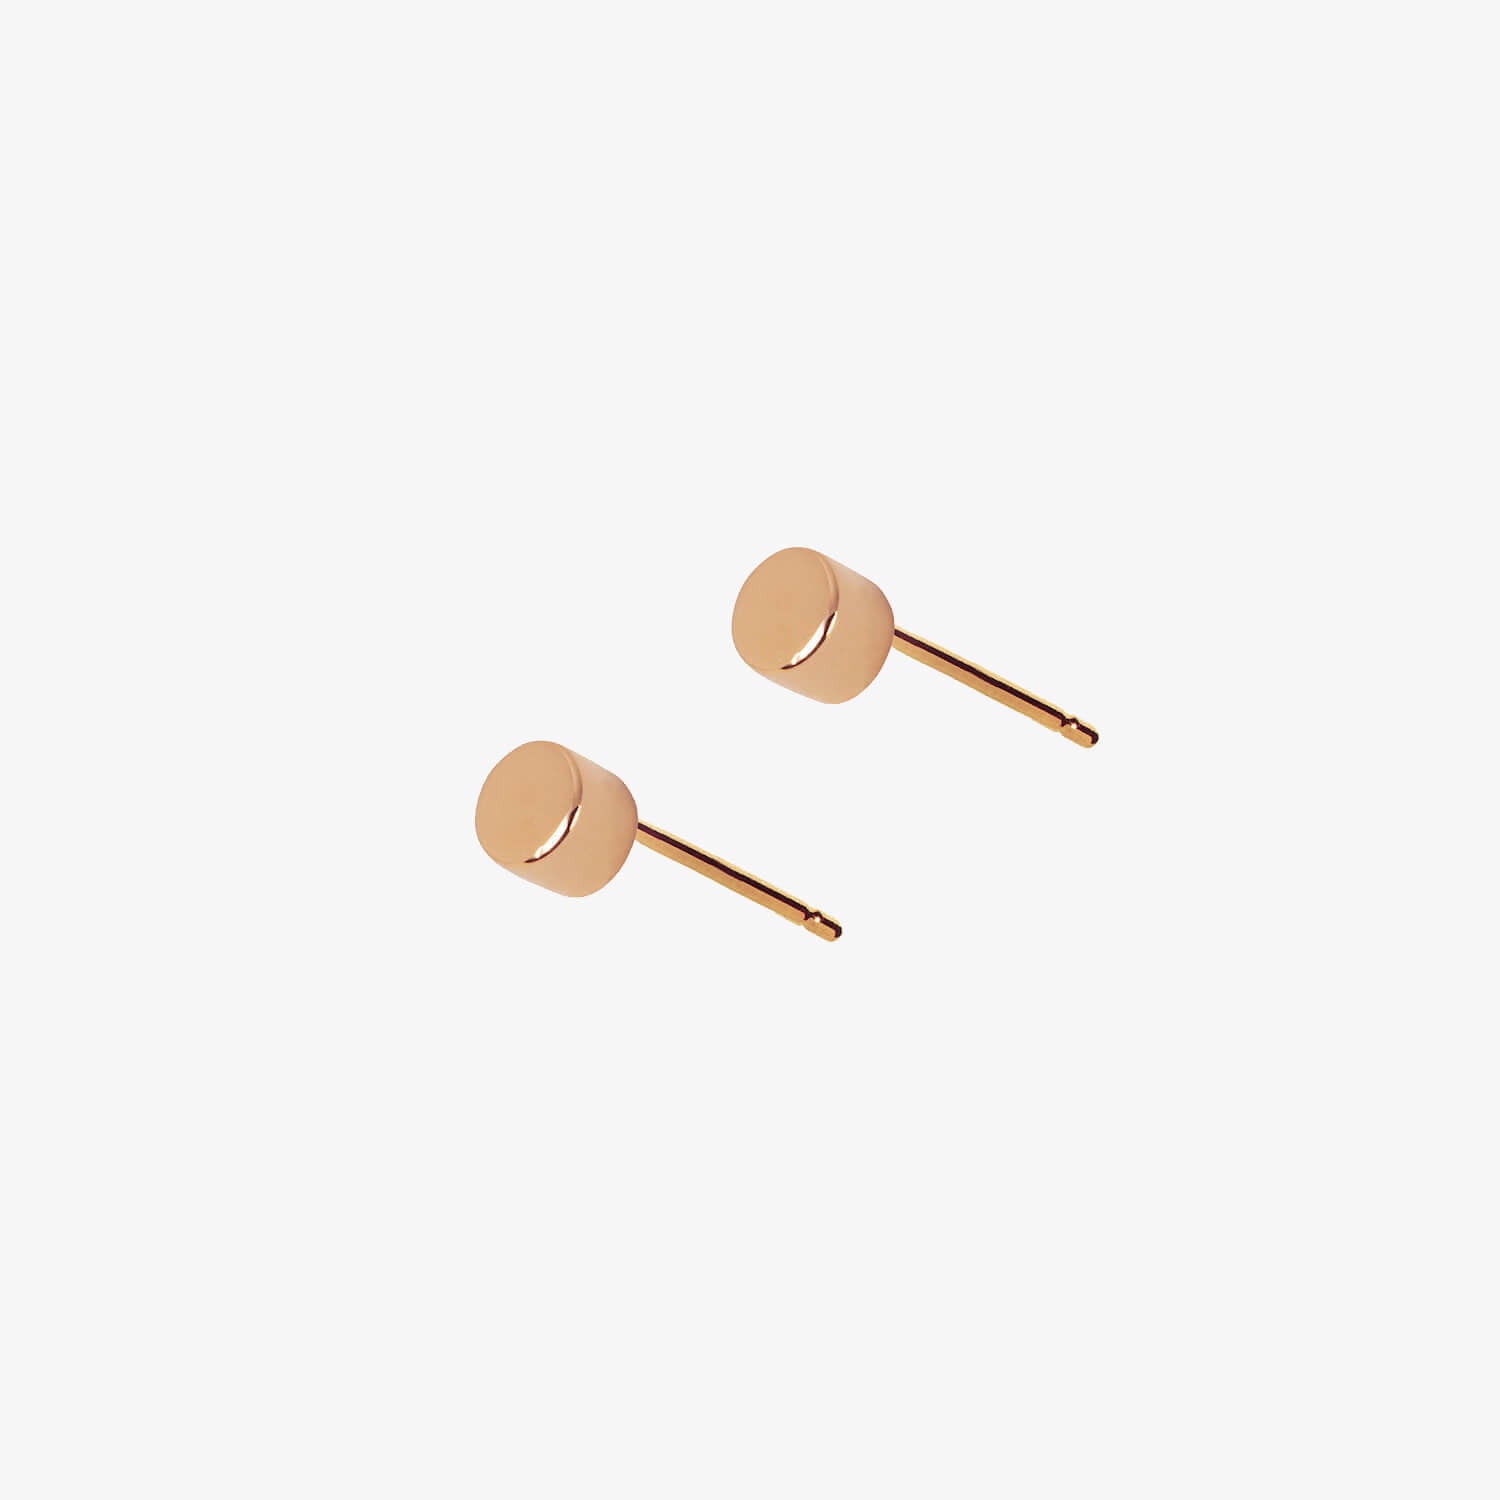 Simple rose gold dot stud earrings by Matthew Calvin on a white background